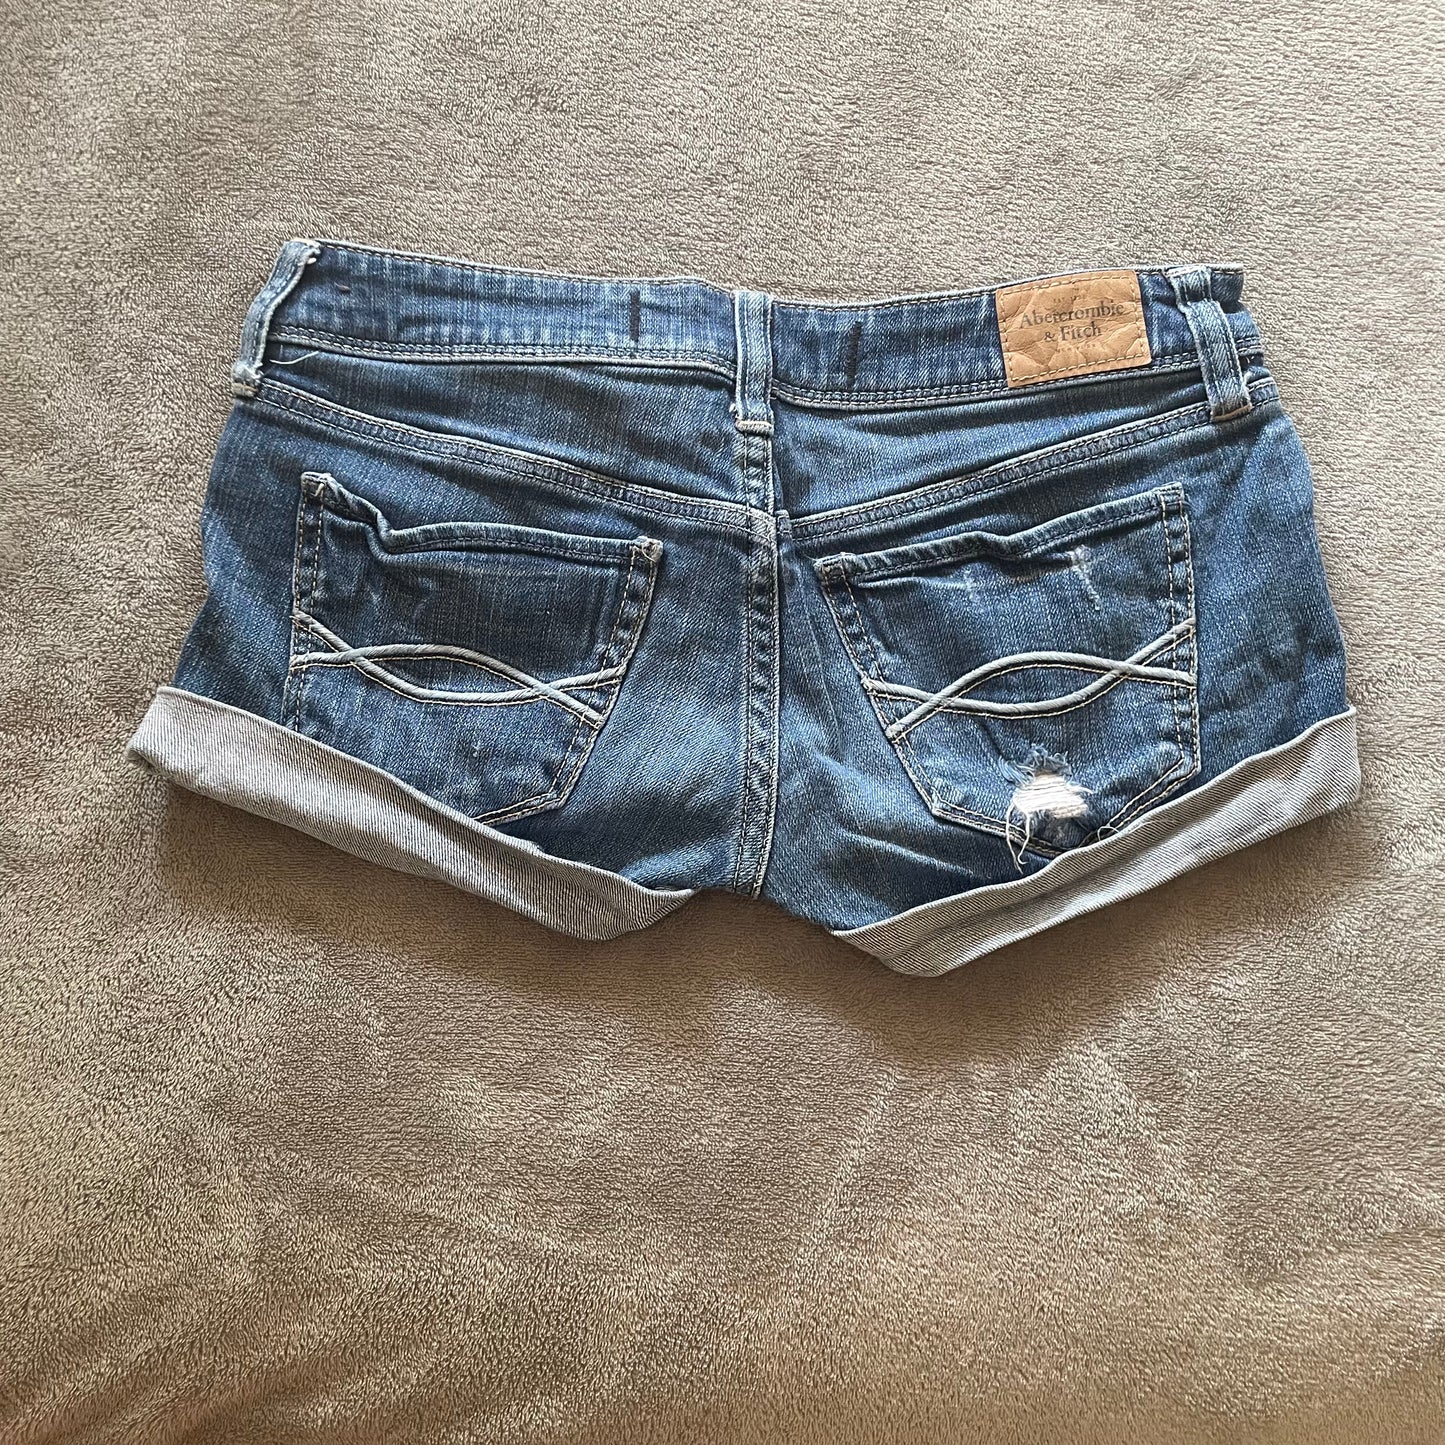 Abercrombie and Fitch denim shorts